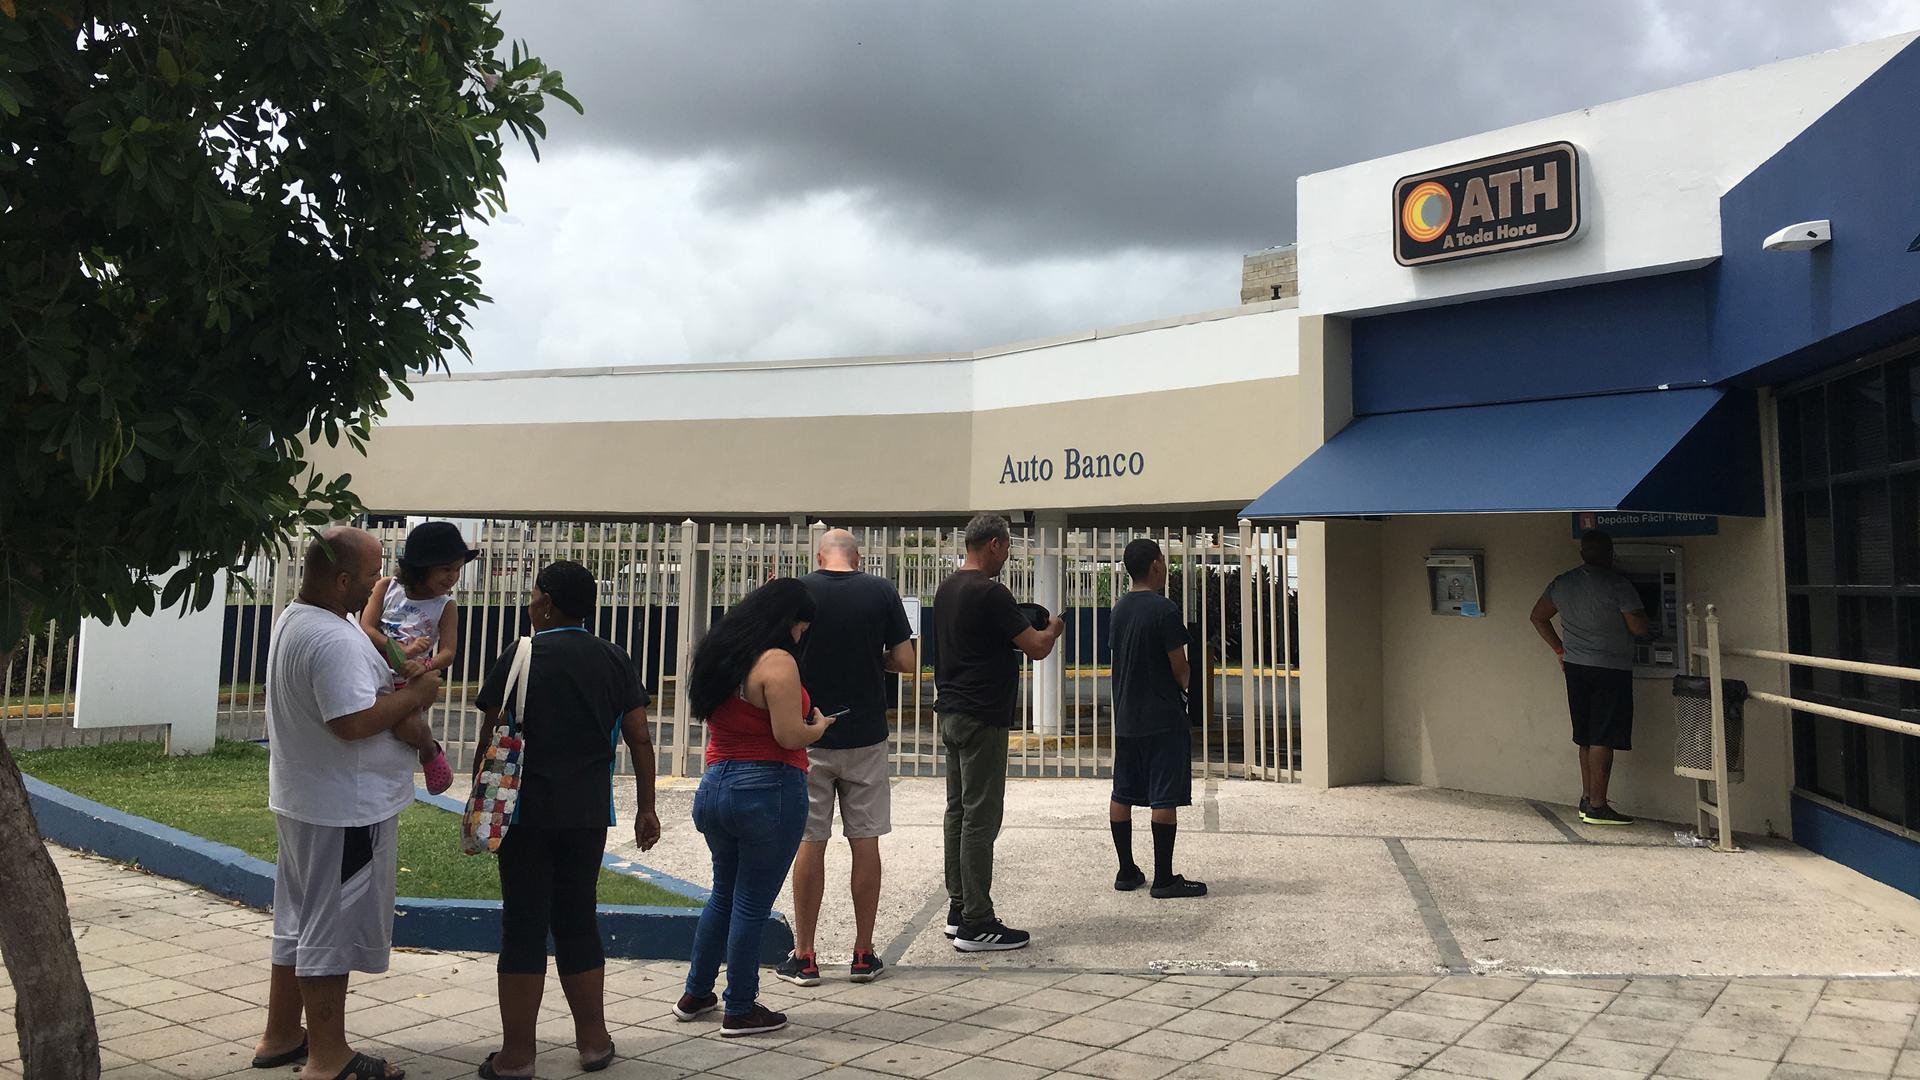 Puerto Ricans wait to get cash out of an ATM in San Juan ahead of Tropical Storm Dorian on Aug. 28, 2019.